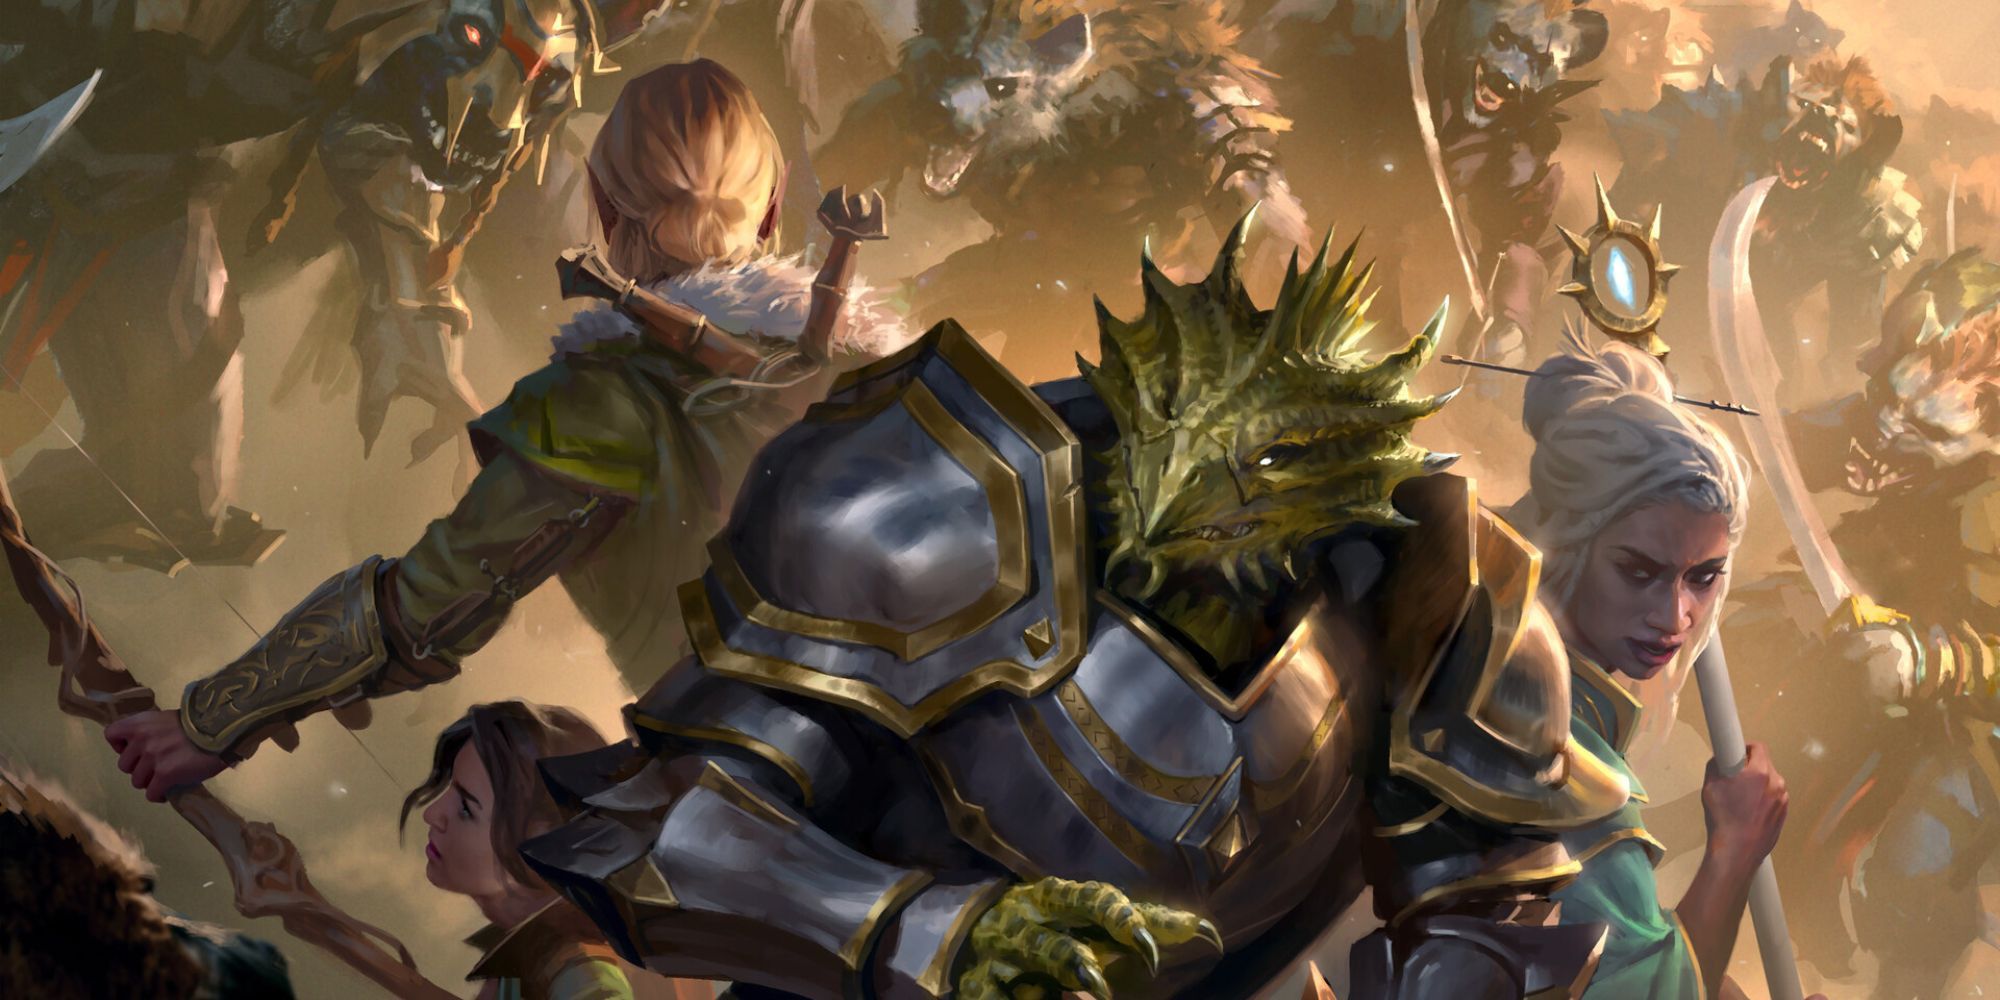 A party surrounded by Gnolls At Their Camp Bracing For A Battle In Magic The Gathering Artwork